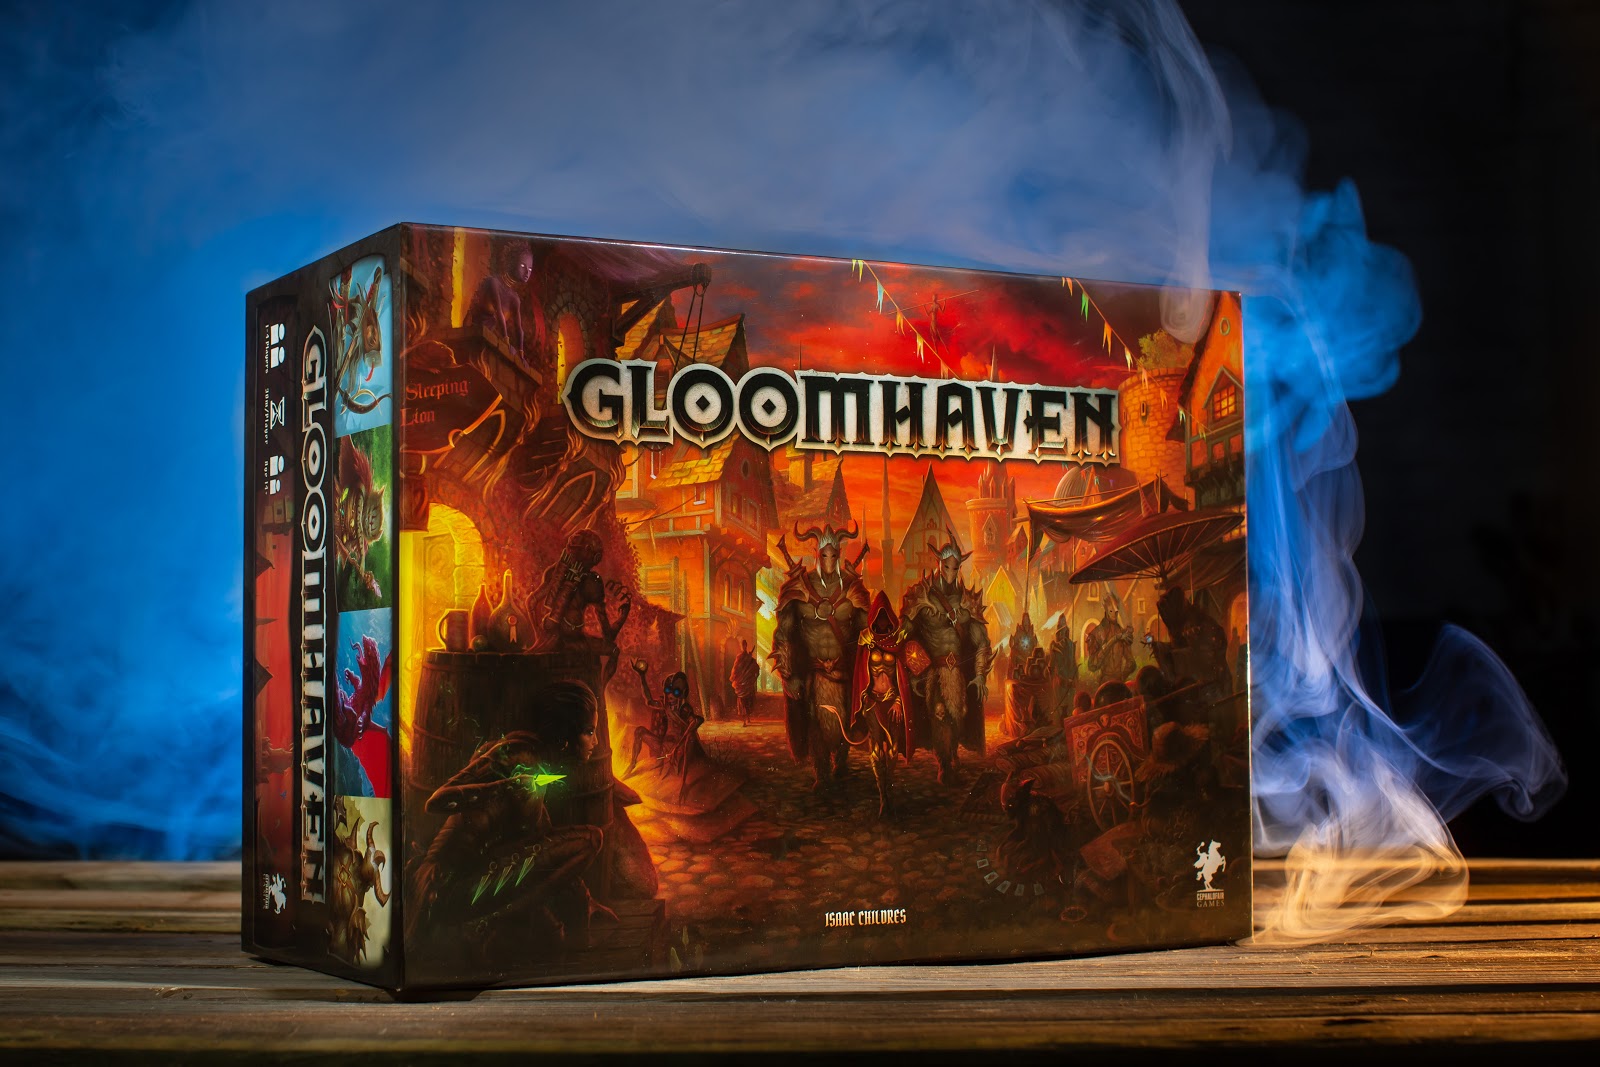 Gloomhaven and Frosthaven are being adapted into a book series